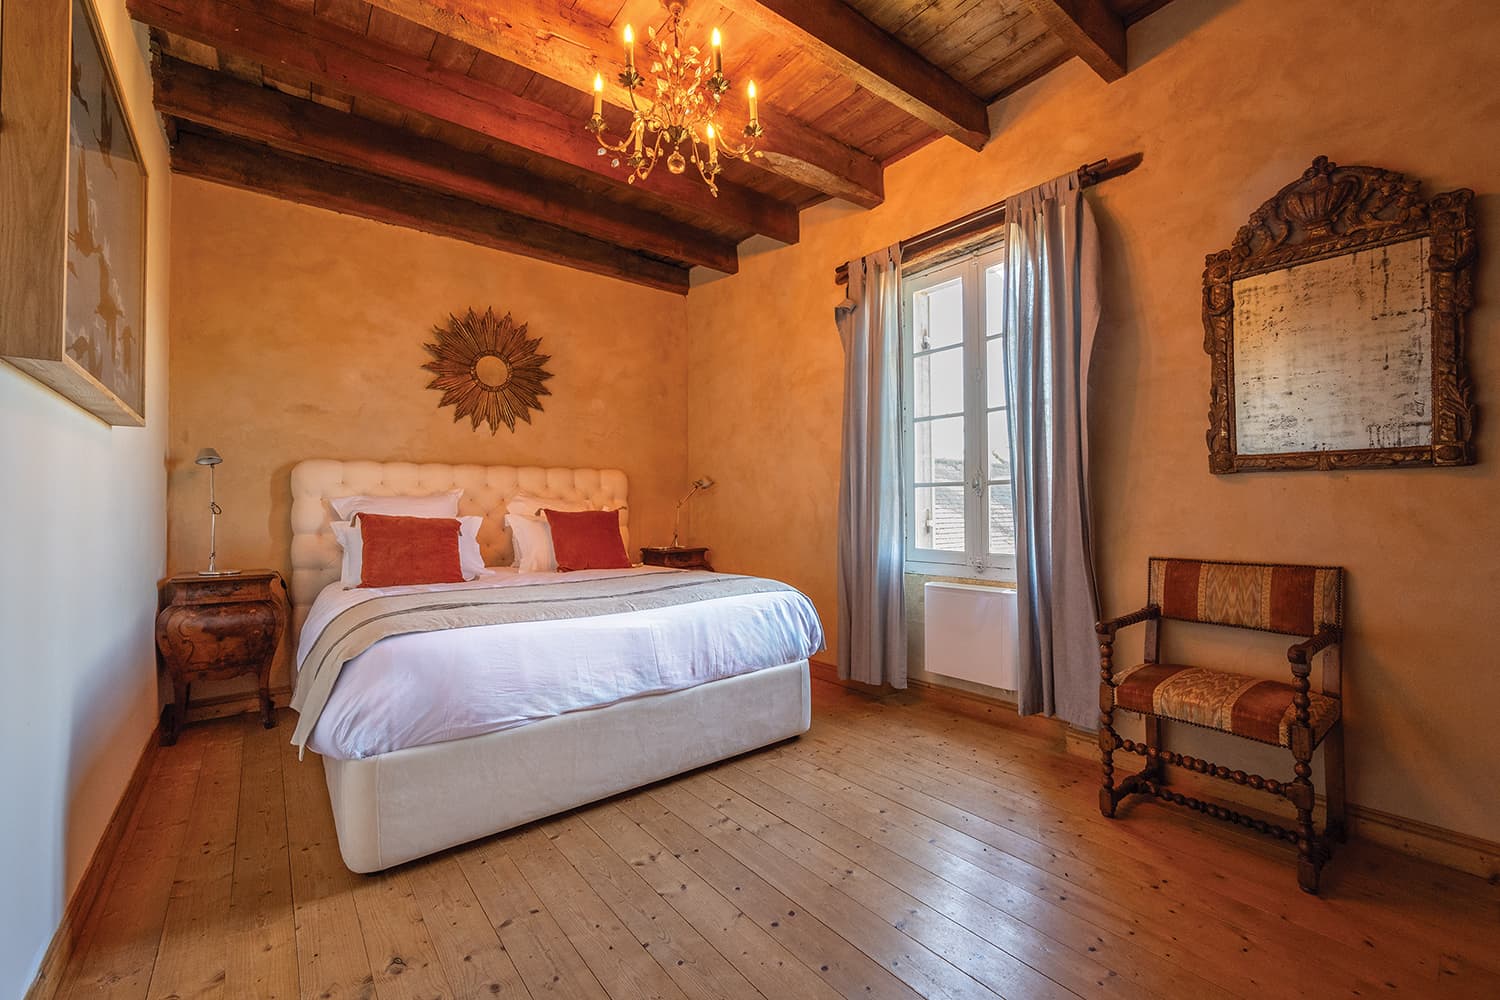 Bedroom | Holiday home in the Dordogne